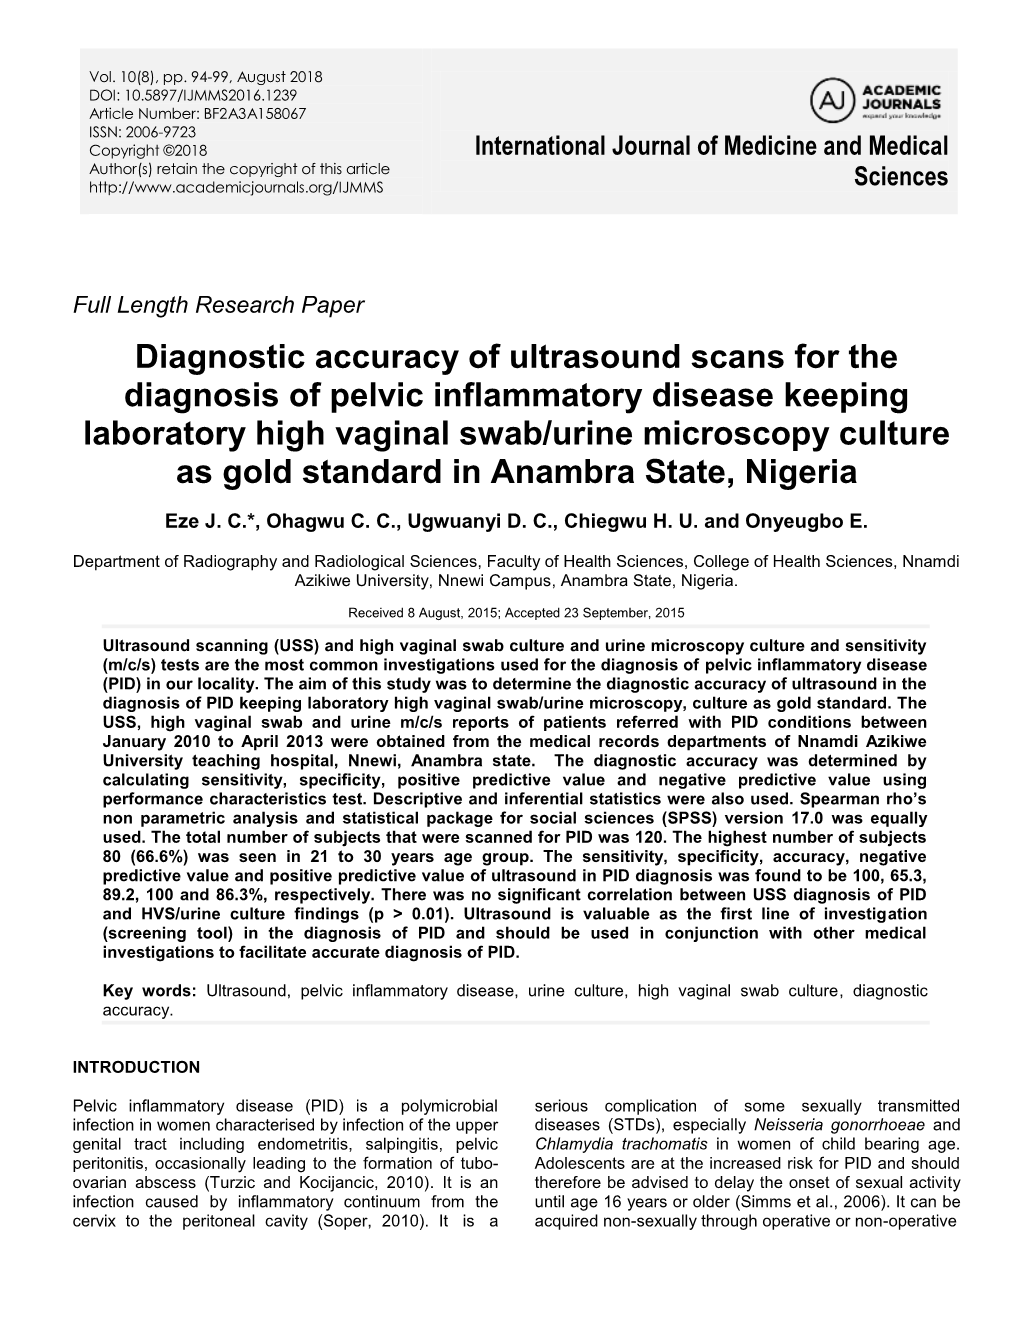 Diagnostic Accuracy of Ultrasound Scans for the Diagnosis of Pelvic